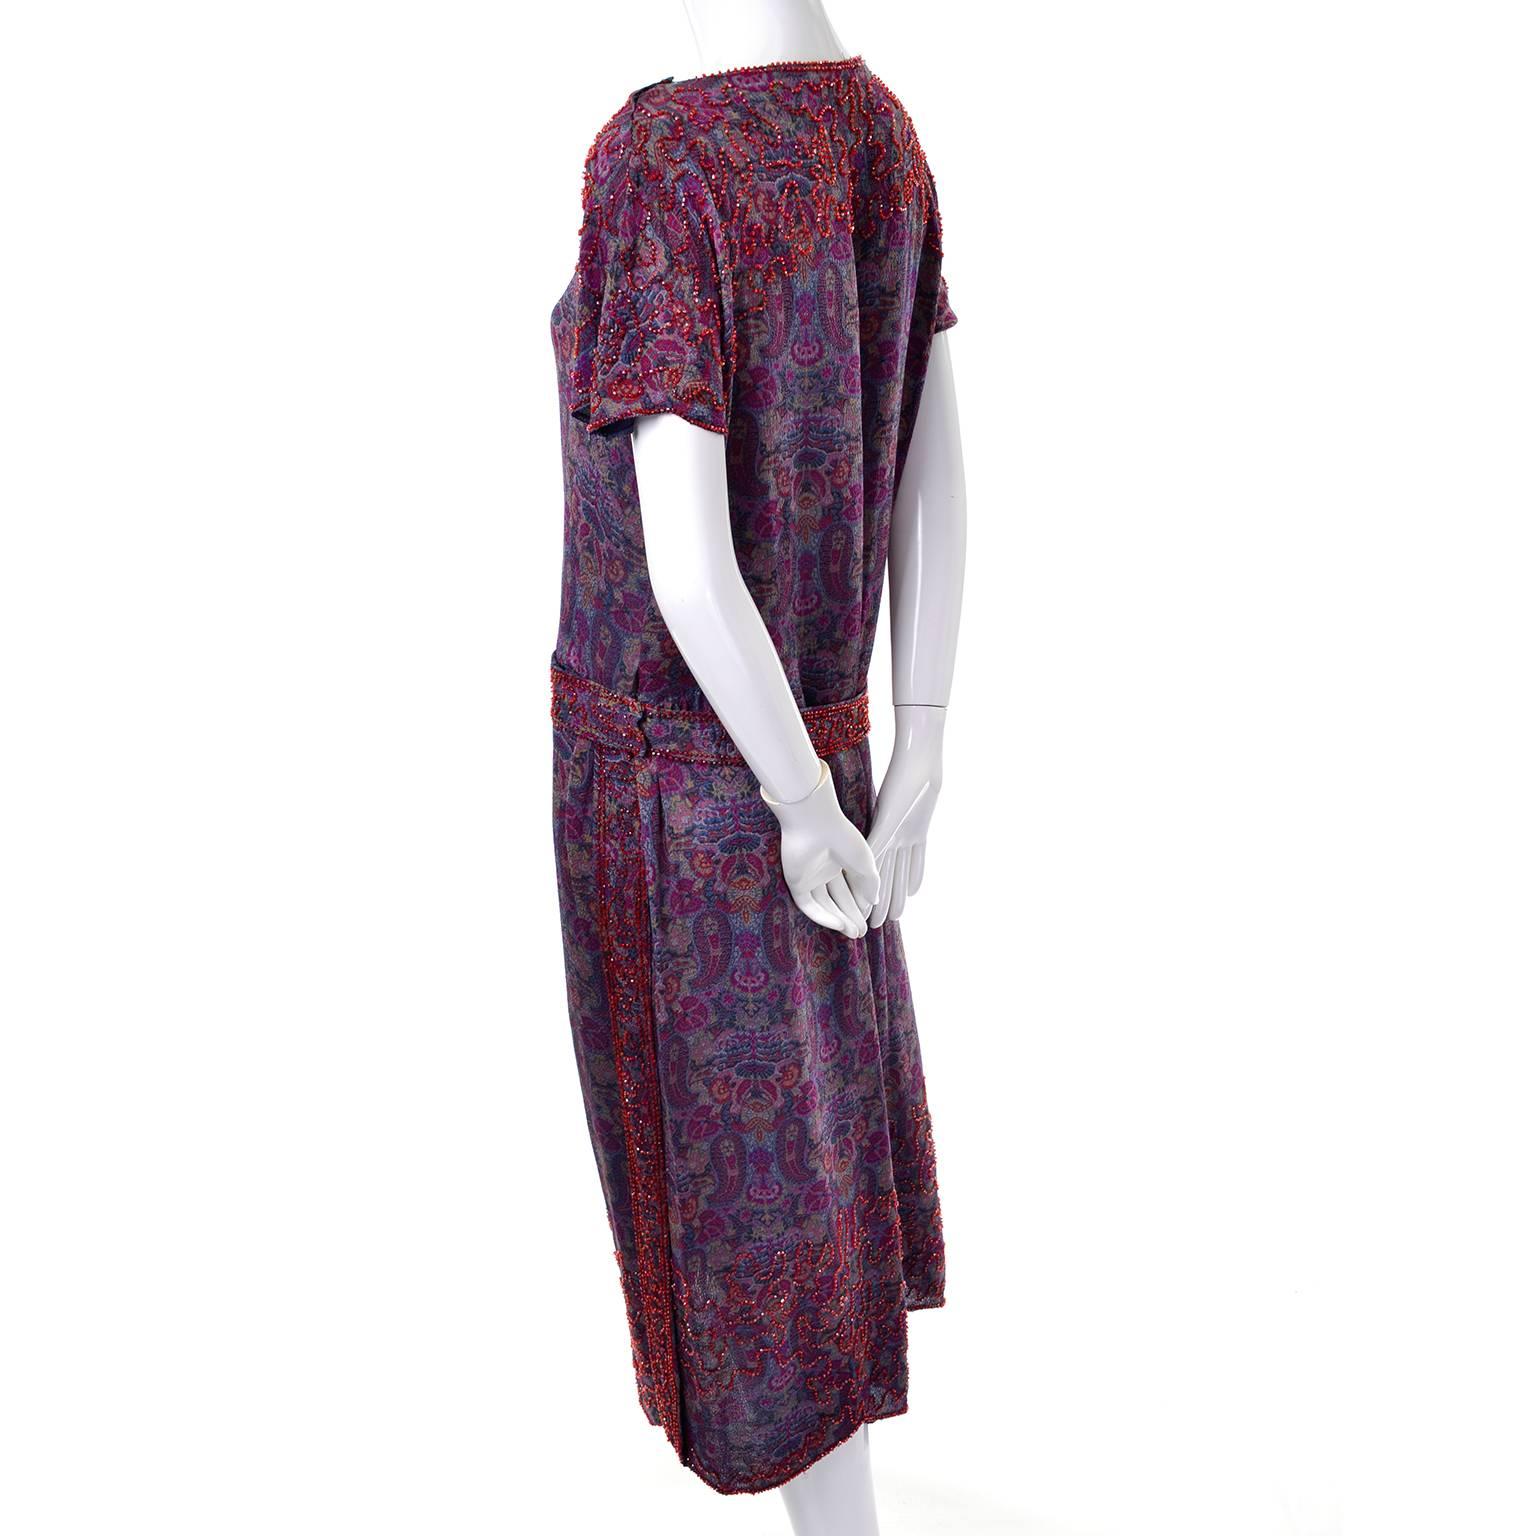 This extraordinary 1920's vintage dress is lightweight wool in blue with a magenta, green and yellow paisley print design. Small red glass beads decorate along the hem and carry on to the end of the sleeves from the bust. The sleeves and bottom hem